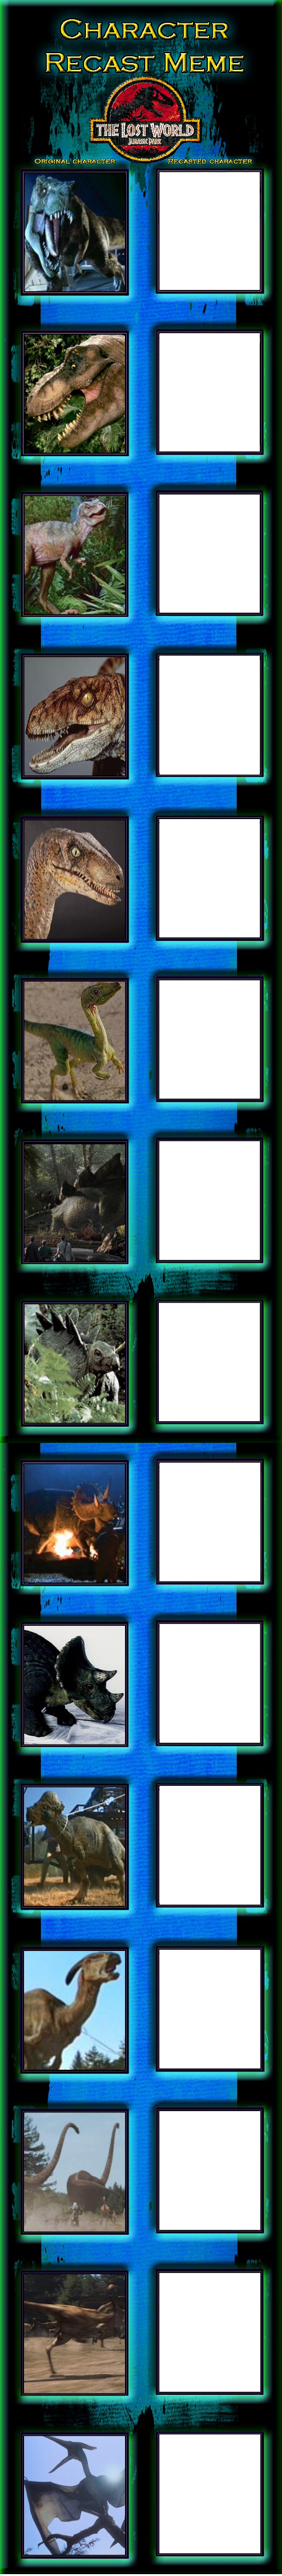 High Quality The Lost World Dinosaur species cast Blank Meme Template